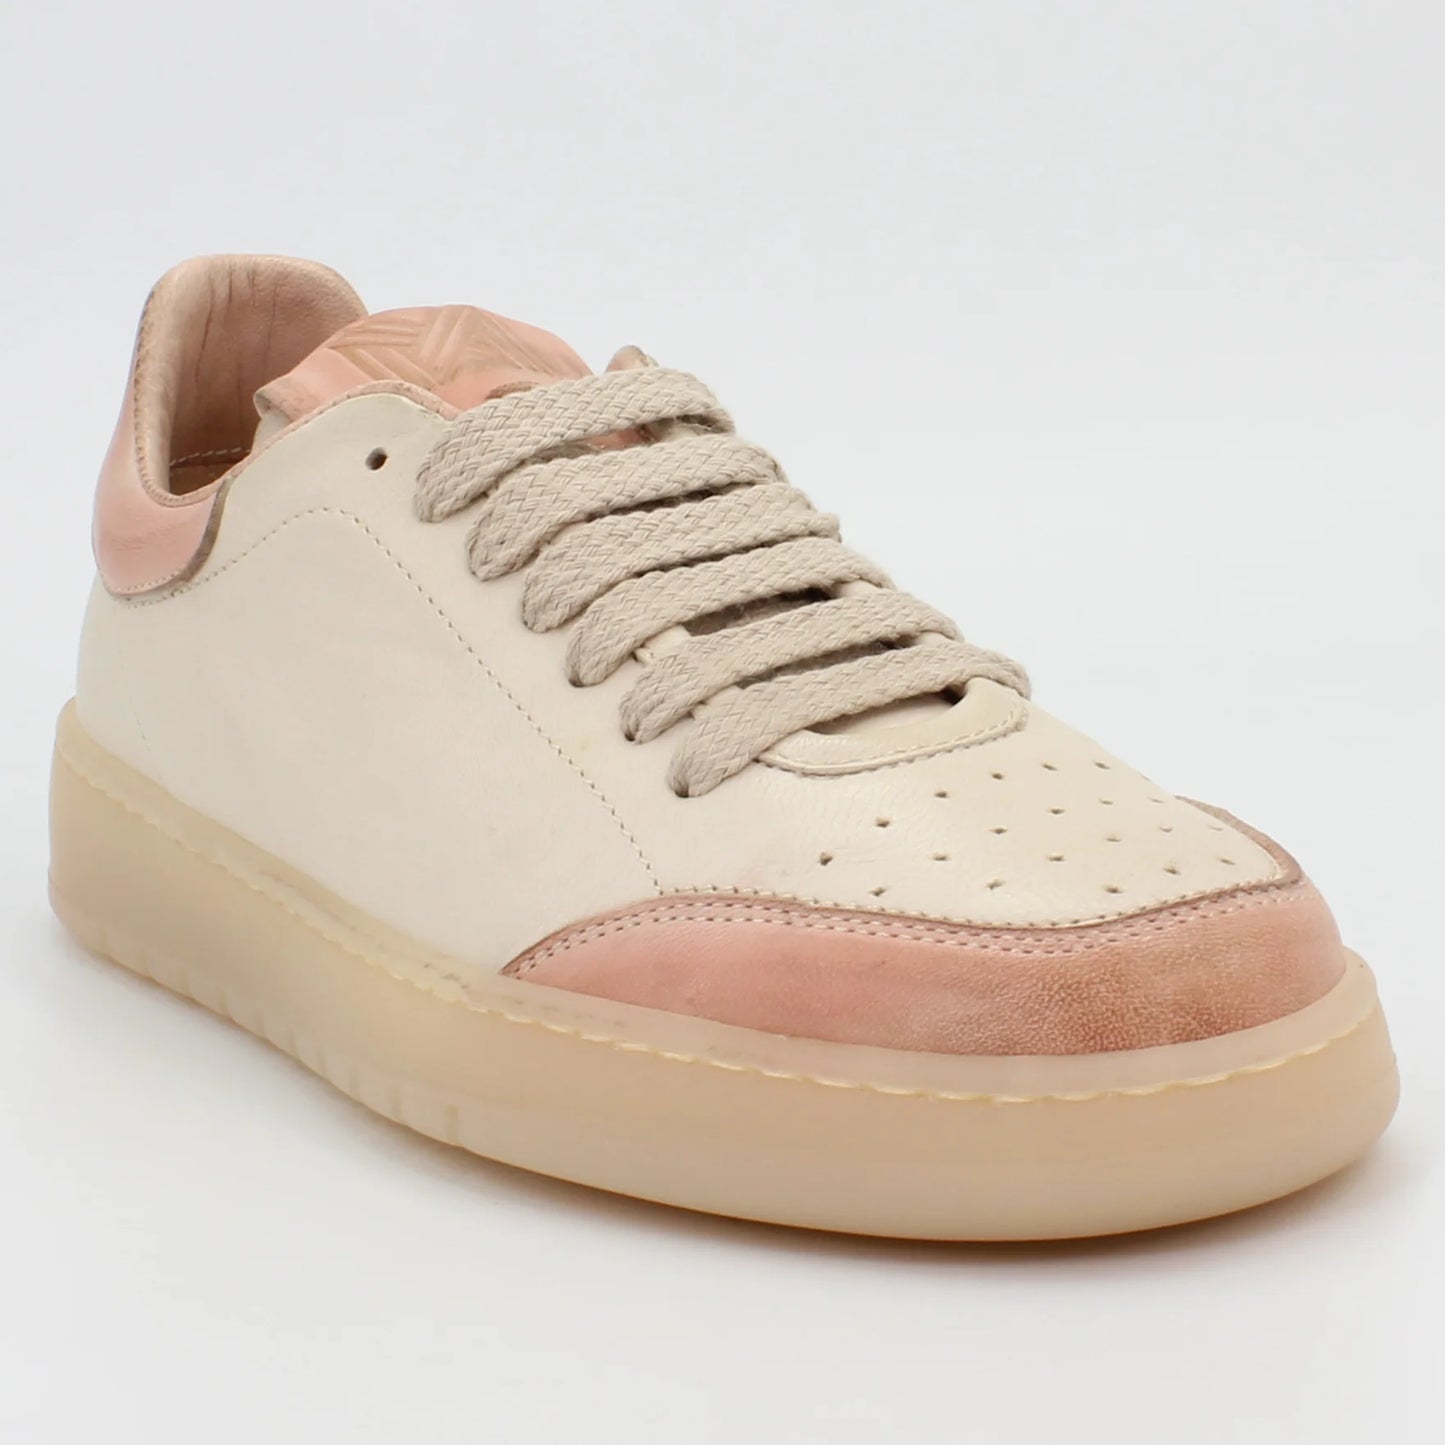 Shop Handmade Italian Leather sneakers in pink (GRD704) or browse our range of hand-made Italian shoes for men in leather or suede in-store at Aliverti Cape Town, or shop online. We deliver in South Africa & offer multiple payment plans as well as accept multiple safe & secure payment methods.